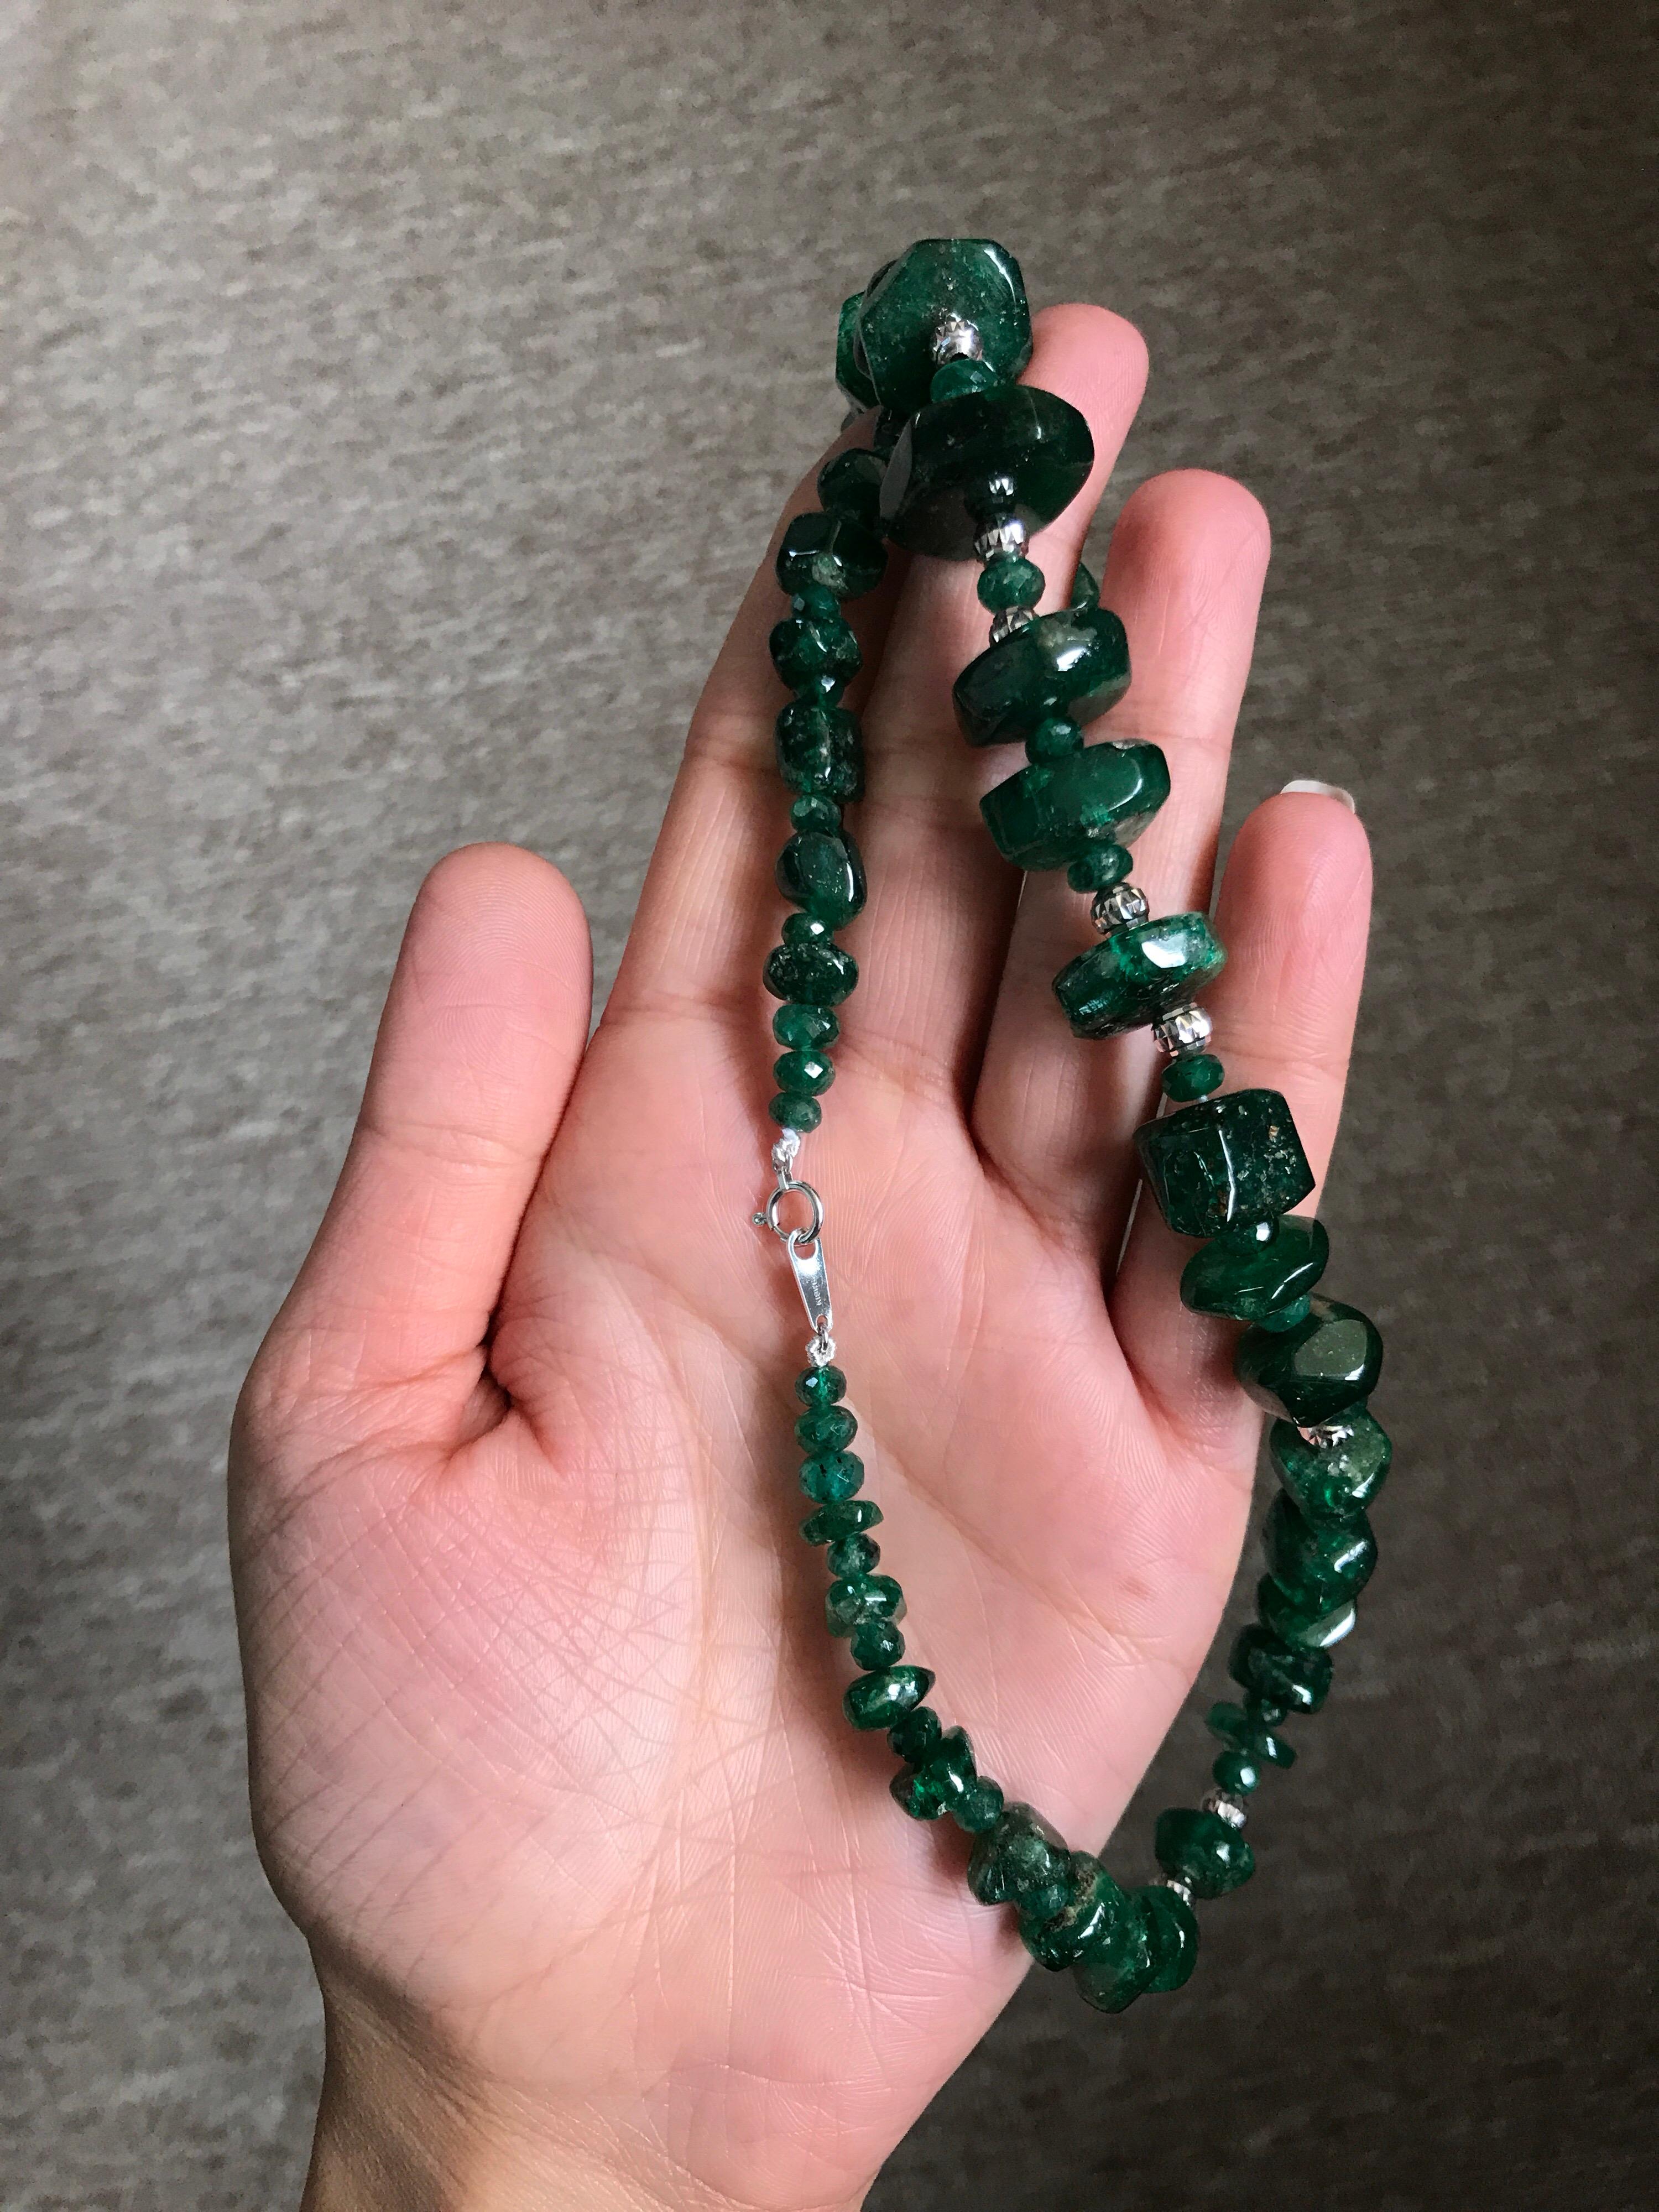 Women's 308 Carat Emerald Tumble Beads Necklace For Sale